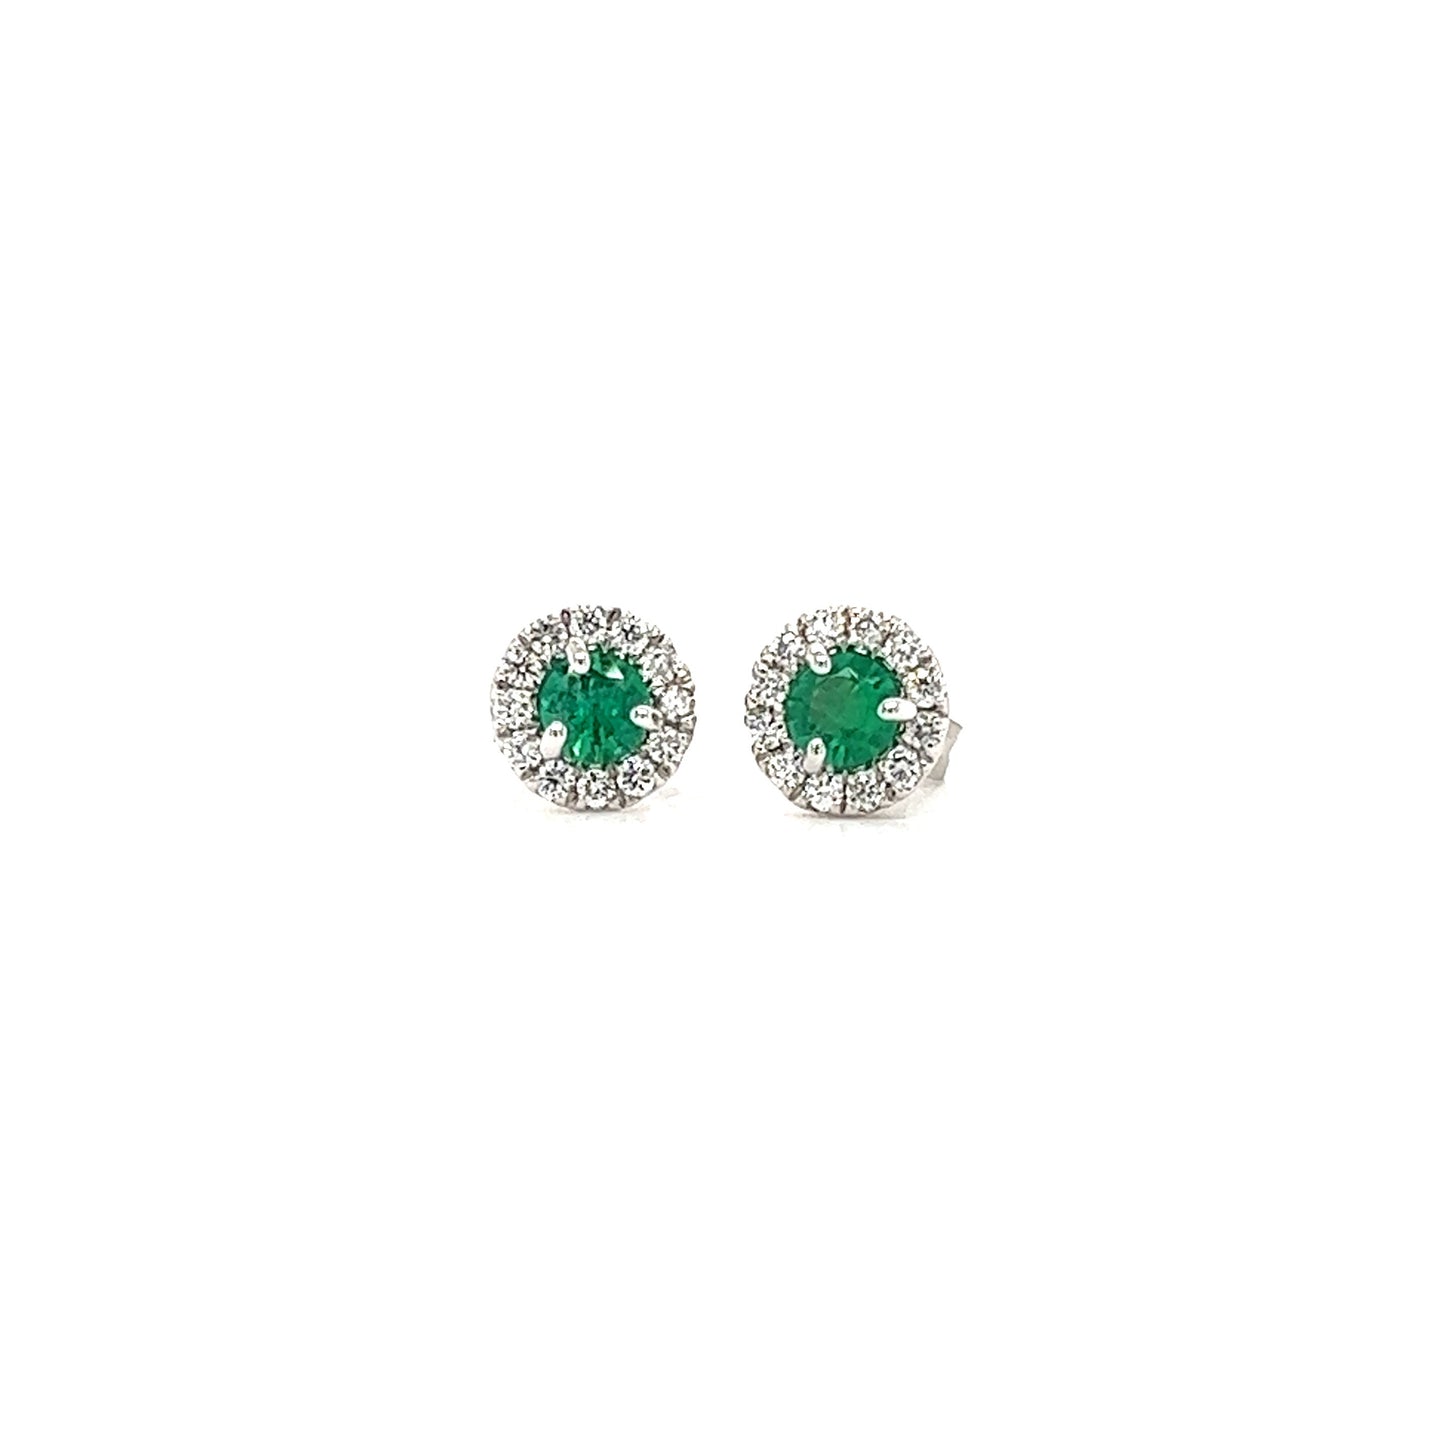 Round Emerald Stud Earrings with Diamond Halo in 14K White Gold Front View